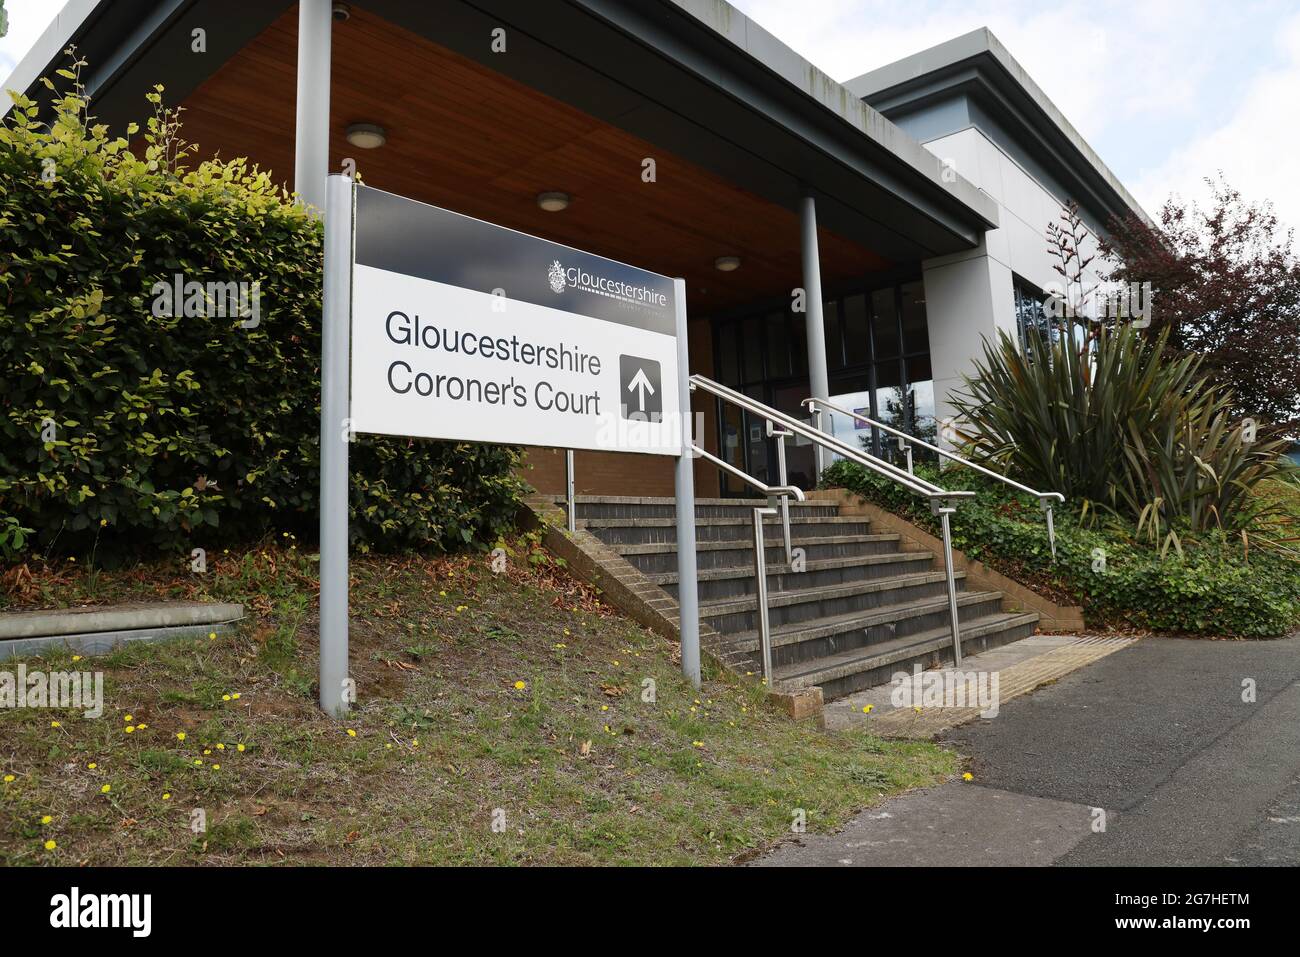 Gloucestershire Coroner's Court - Gloucestershire Coroners Service - Picture by Antony Thompson - Thousand Word Media, NO SALES, NO SYNDICATION. Con Foto Stock